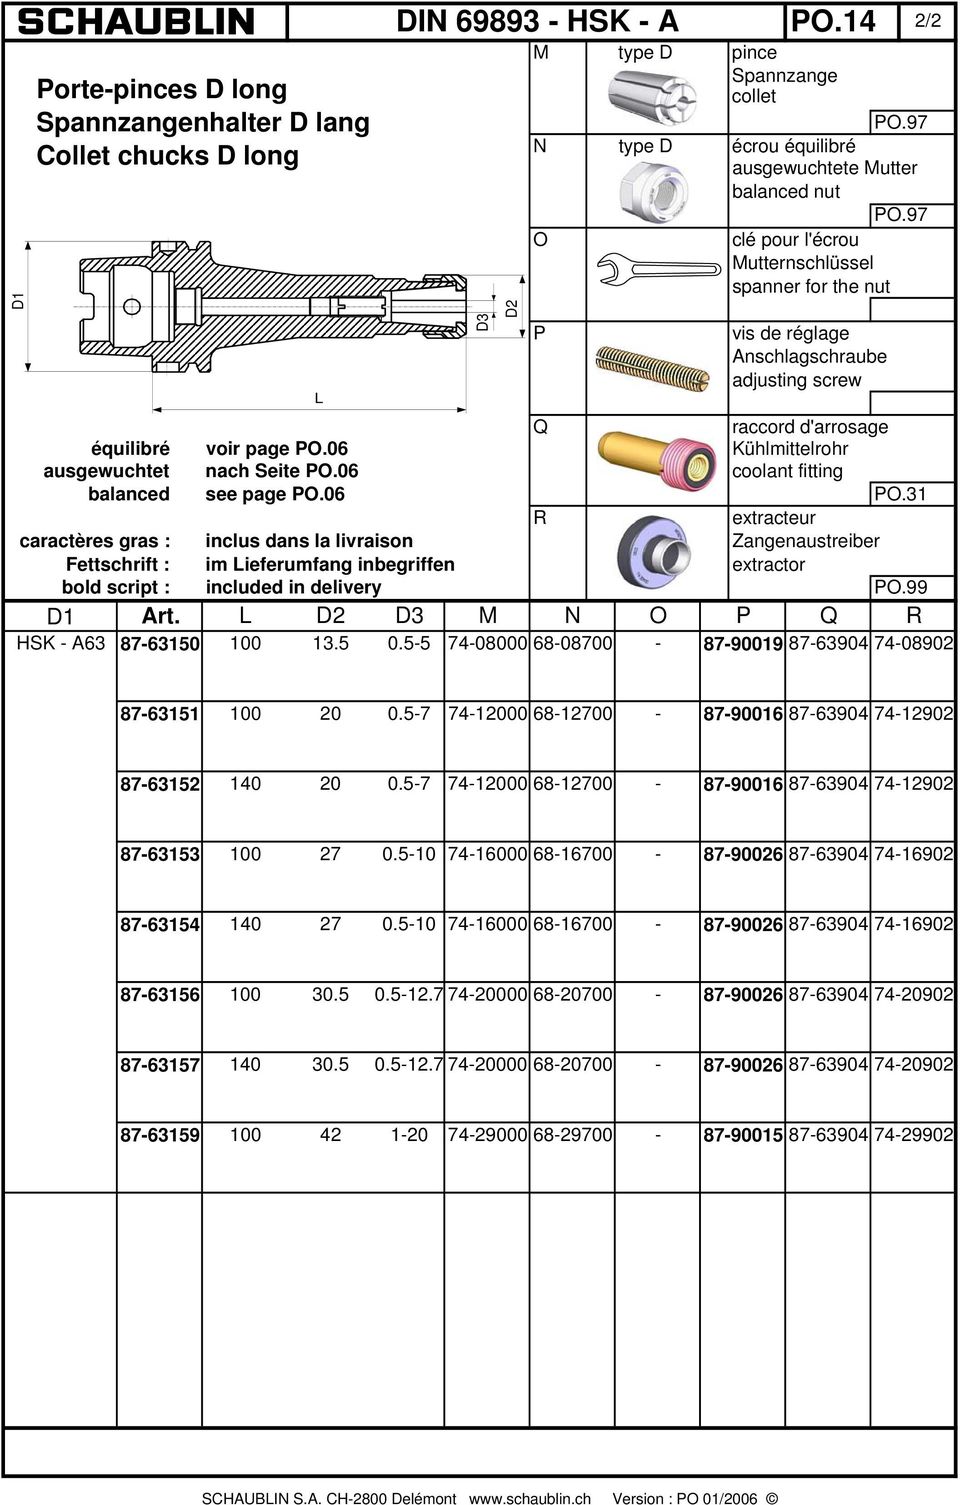 06 coolant fitting balanced see page PO.06 PO.